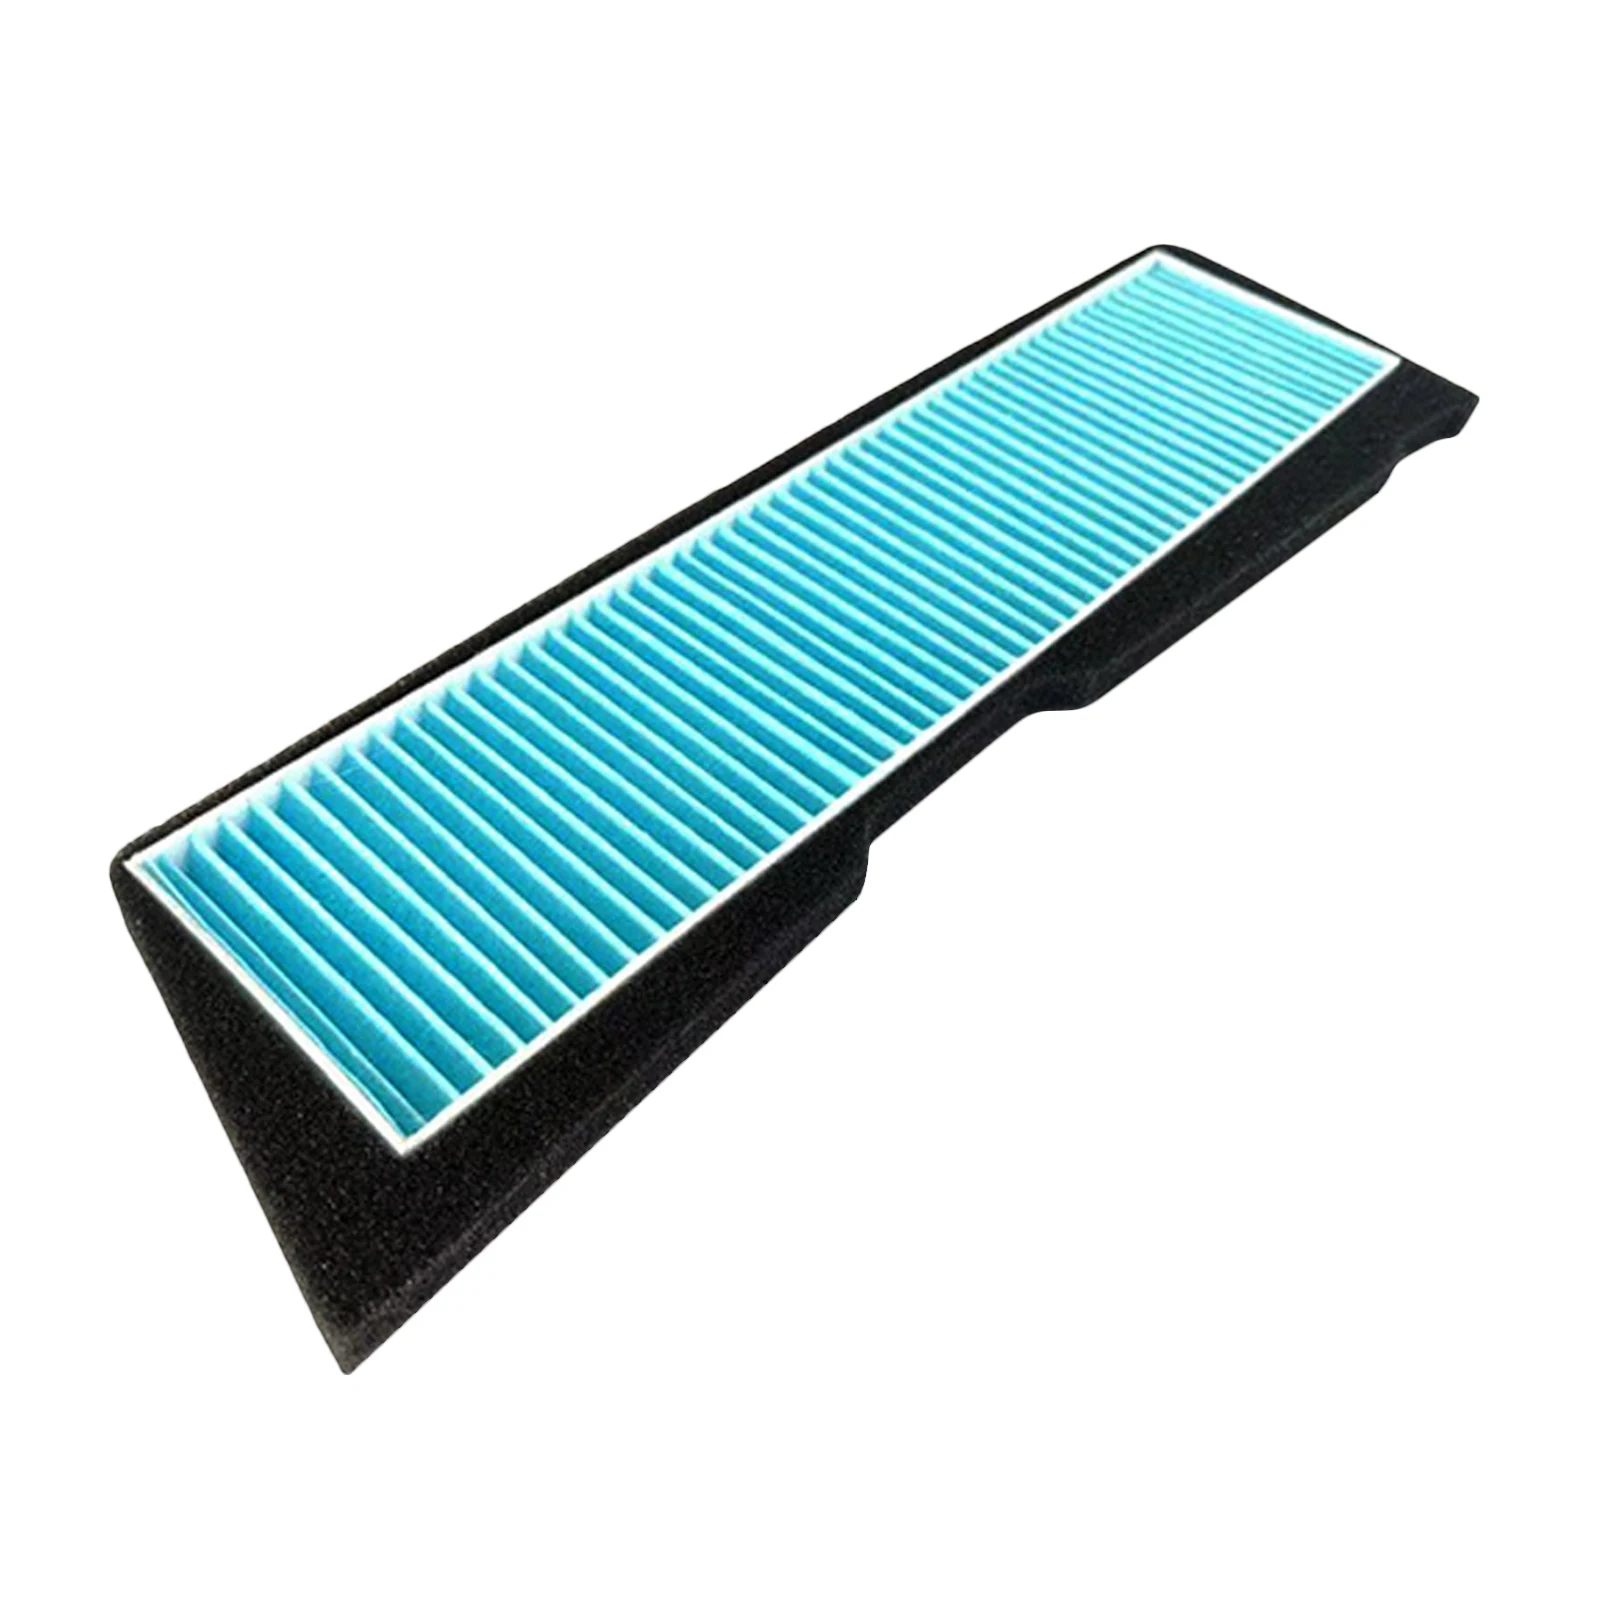 

Car Air Flow Vent Cover Trim Auto ForTesla Model 3 Air Filter Accessories Anti-Blocking Model3 Air Inlet Cover Intake Protection